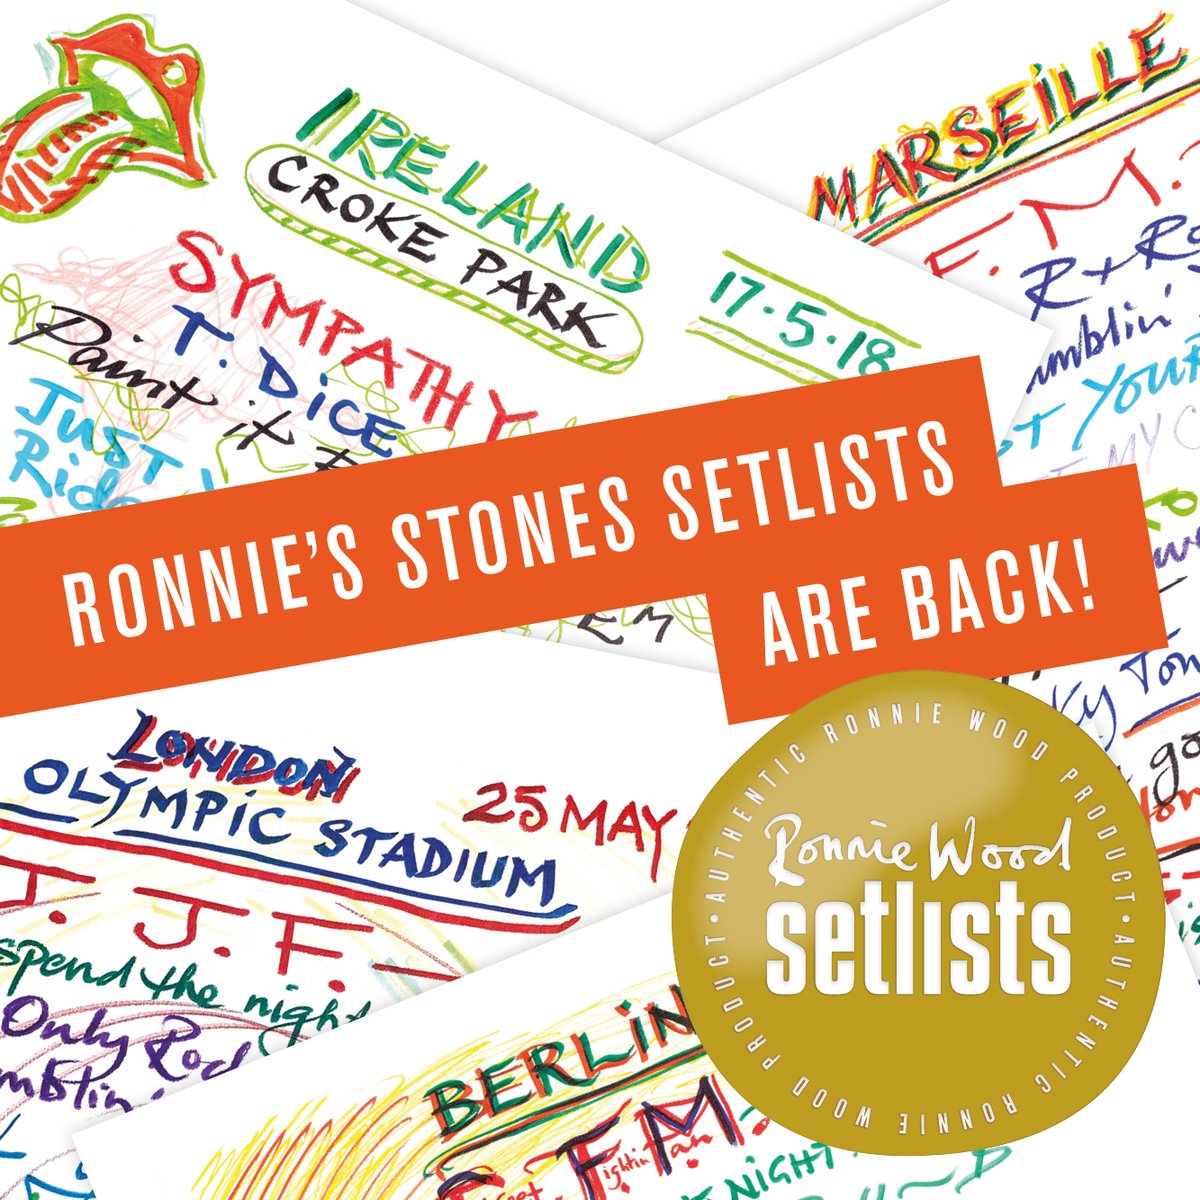 Ronnie Wood on Twitter: "Back for 2021, my @rollingstones setlists! They  feature the setlists from the Stones' 2018 No Filter tour of Europe. Were  you there? See them all and find out